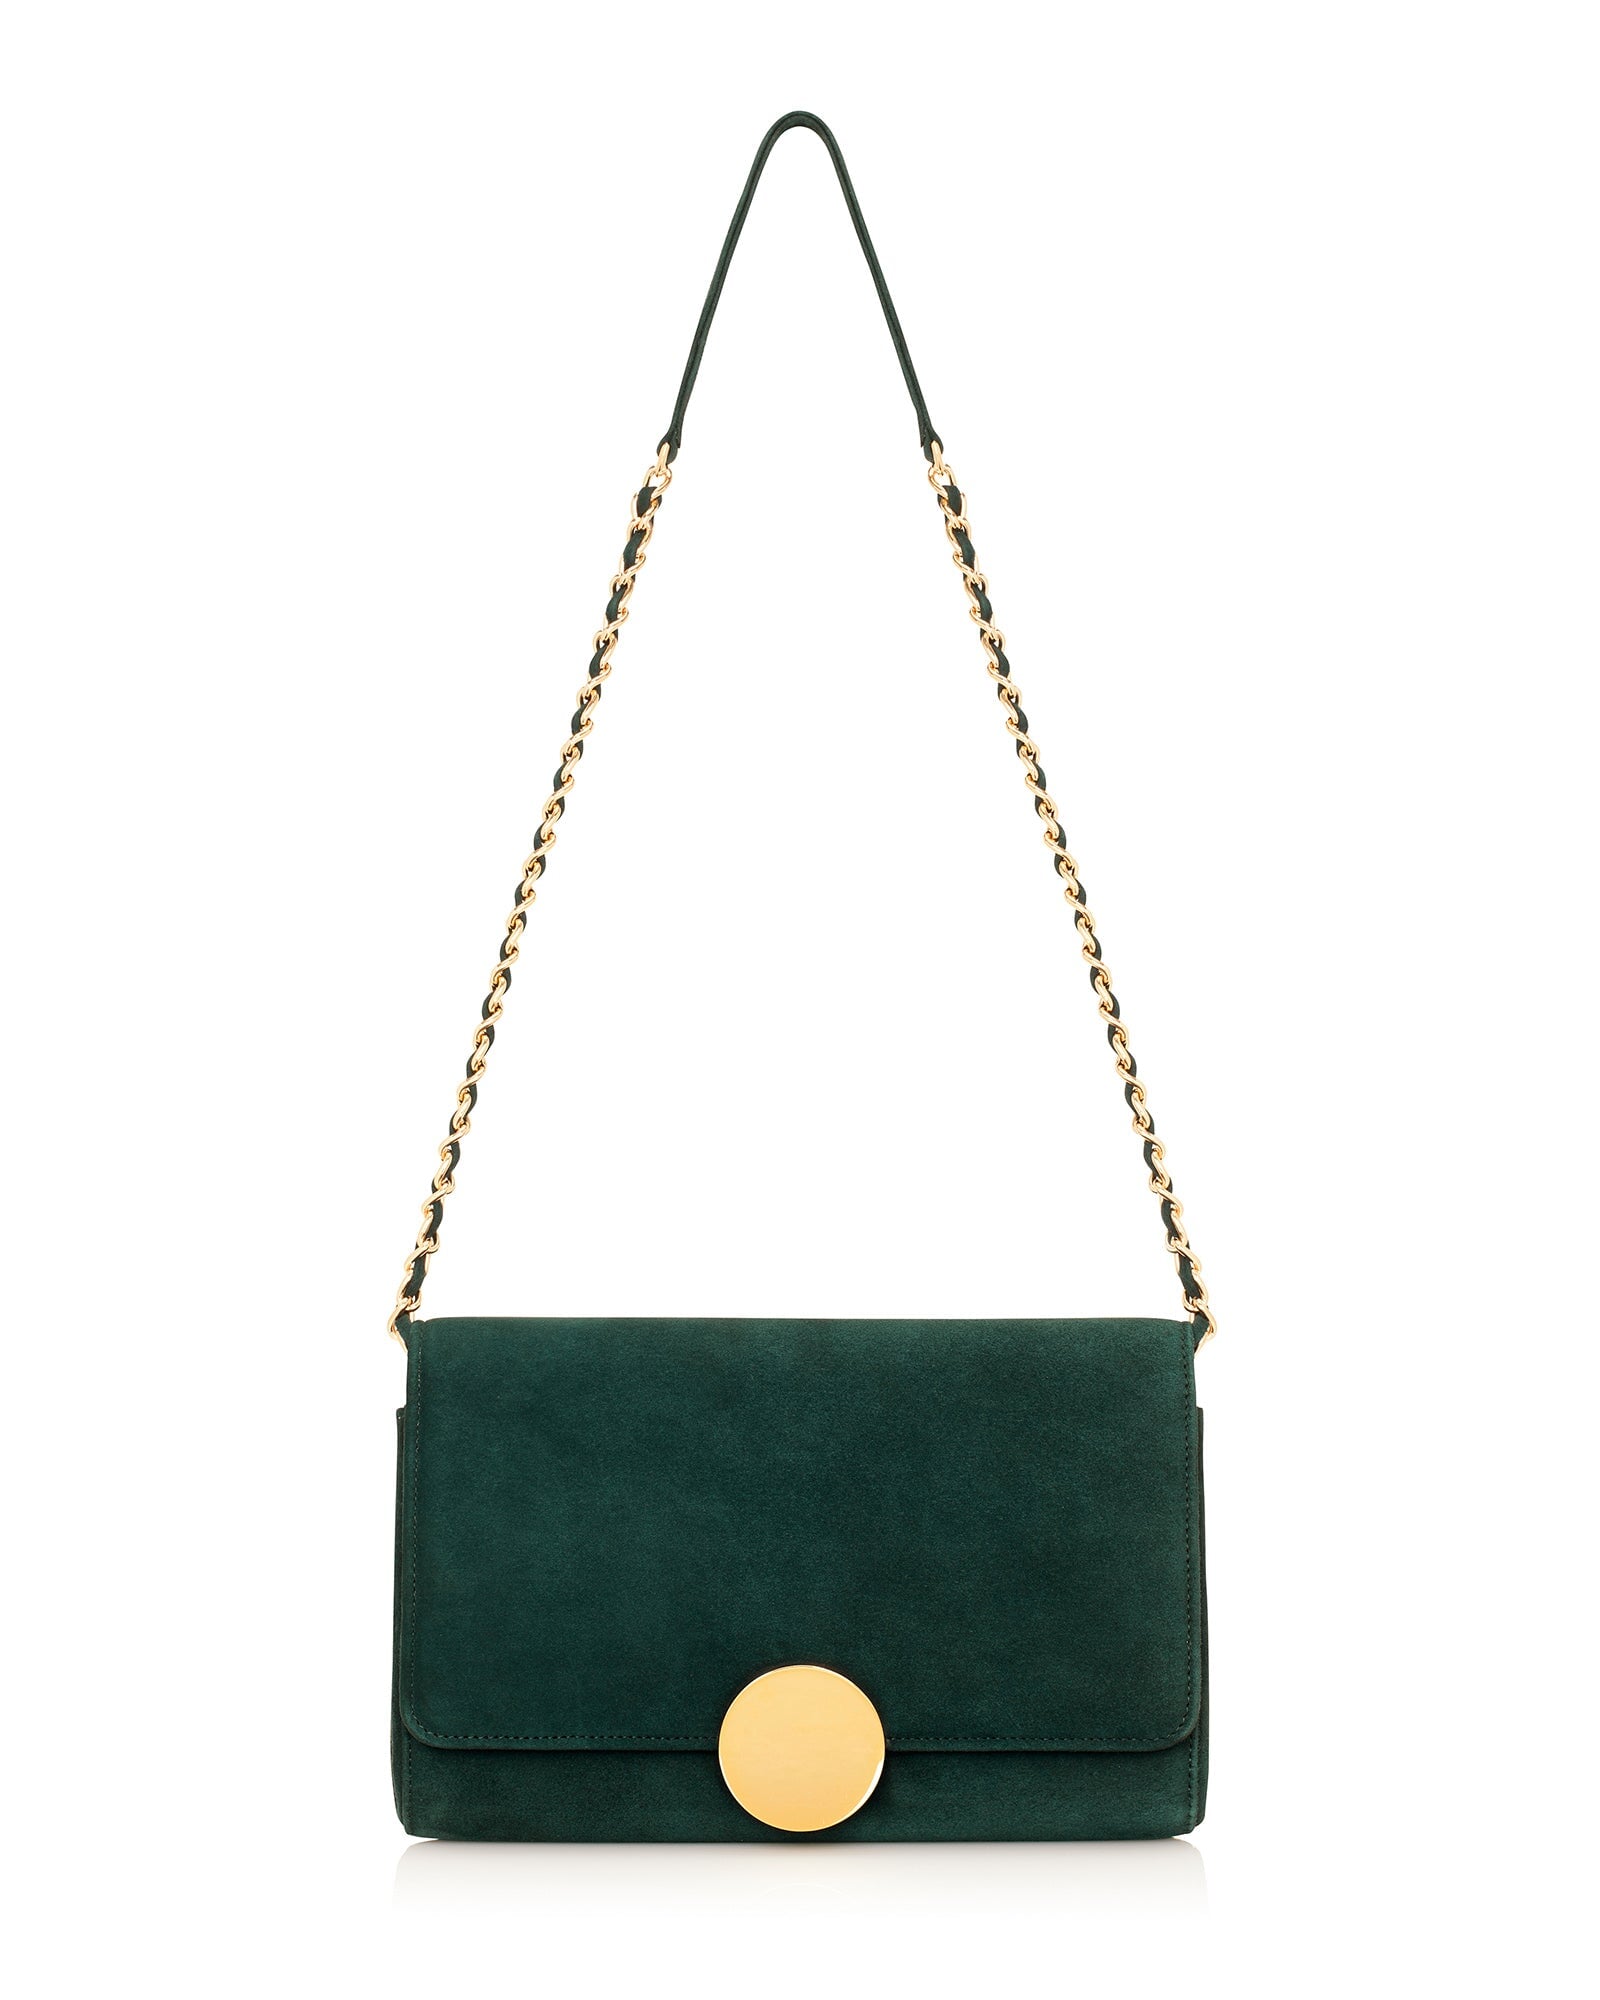 Naomi Greenery Occasion Bag Green Suede Clutch Bag  image